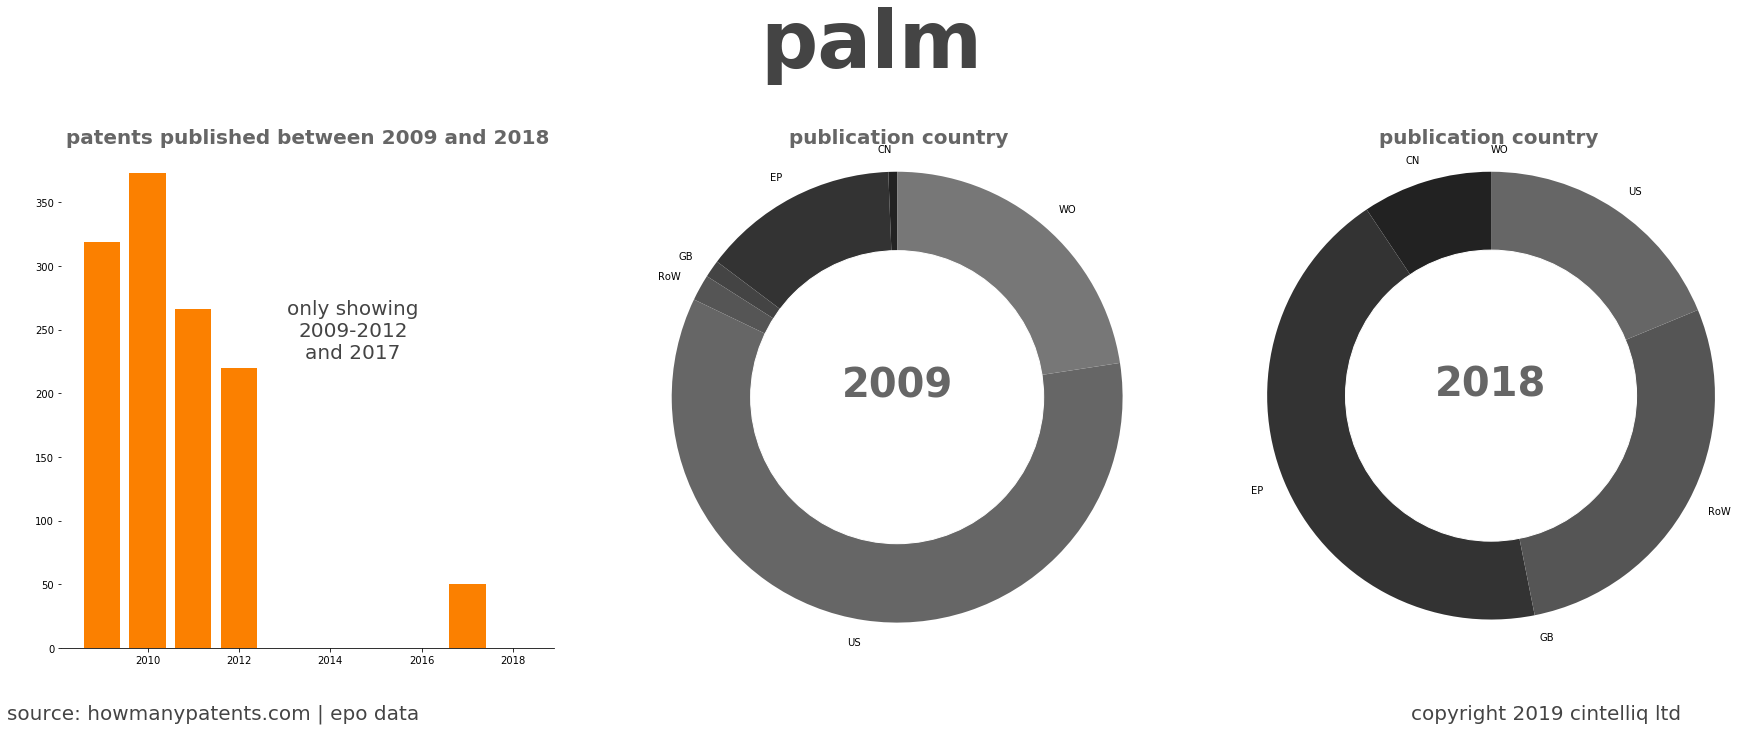 summary of patents for Palm